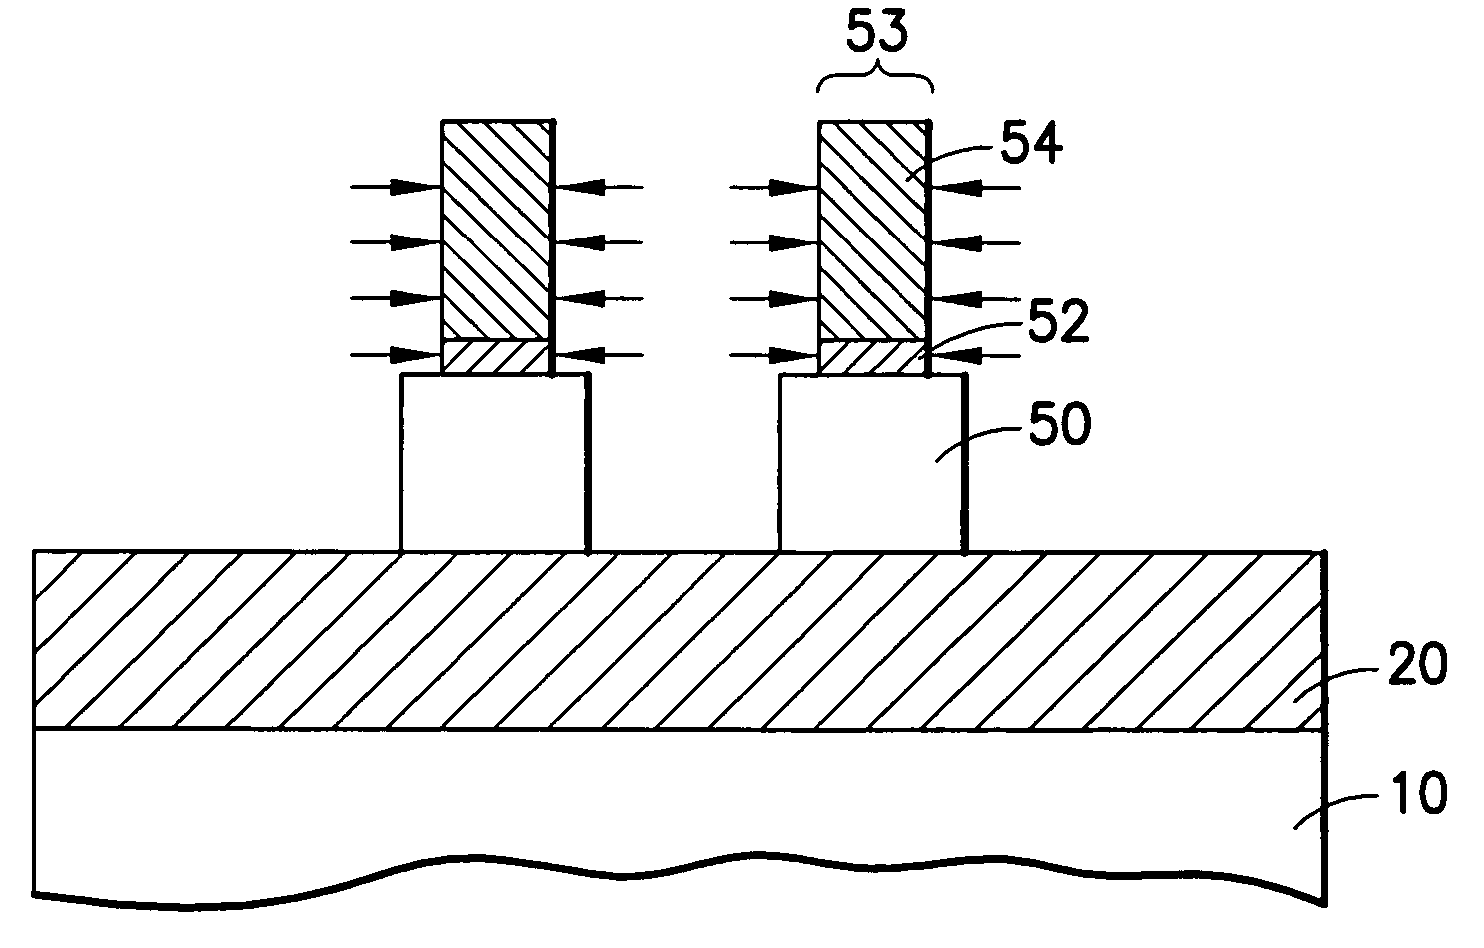 Pull-back method of forming fins in FinFets